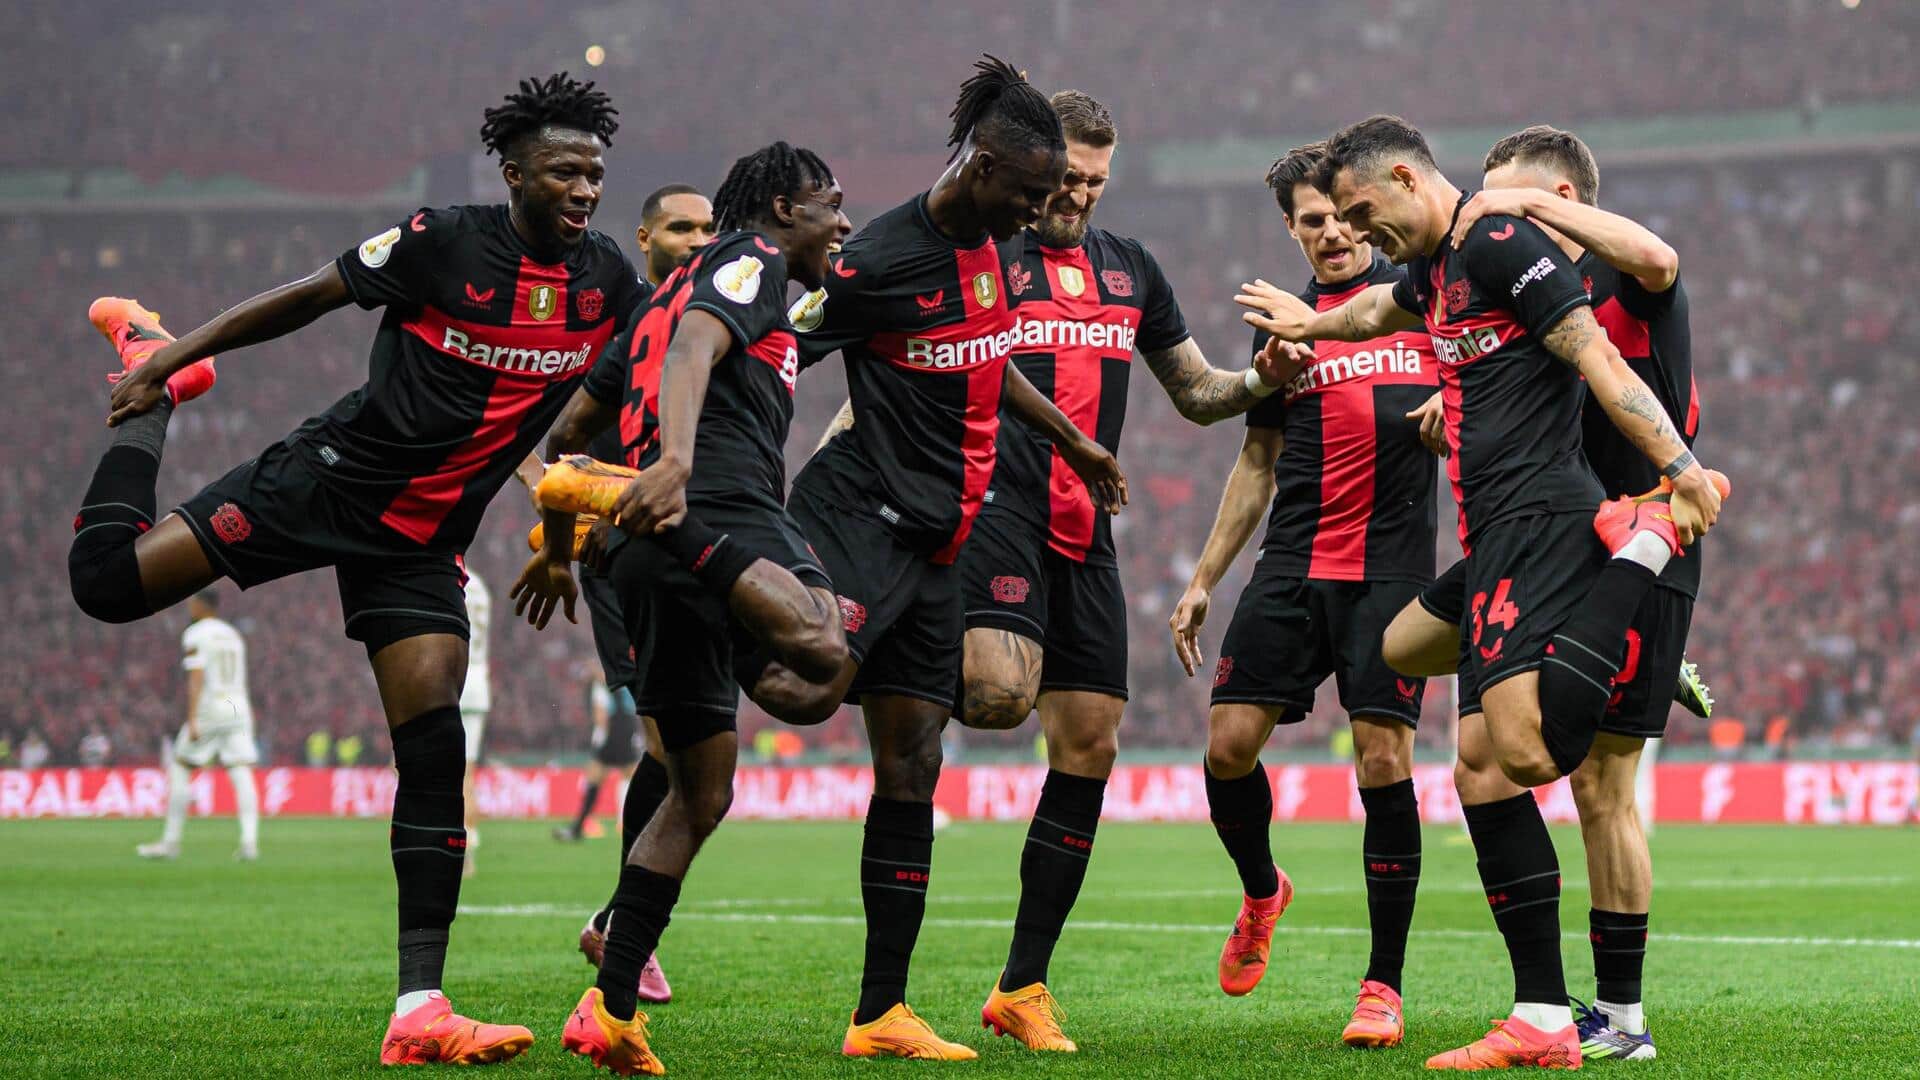 Bayer Leverkusen complete domestic double with DFB-Pokal title: Key stats